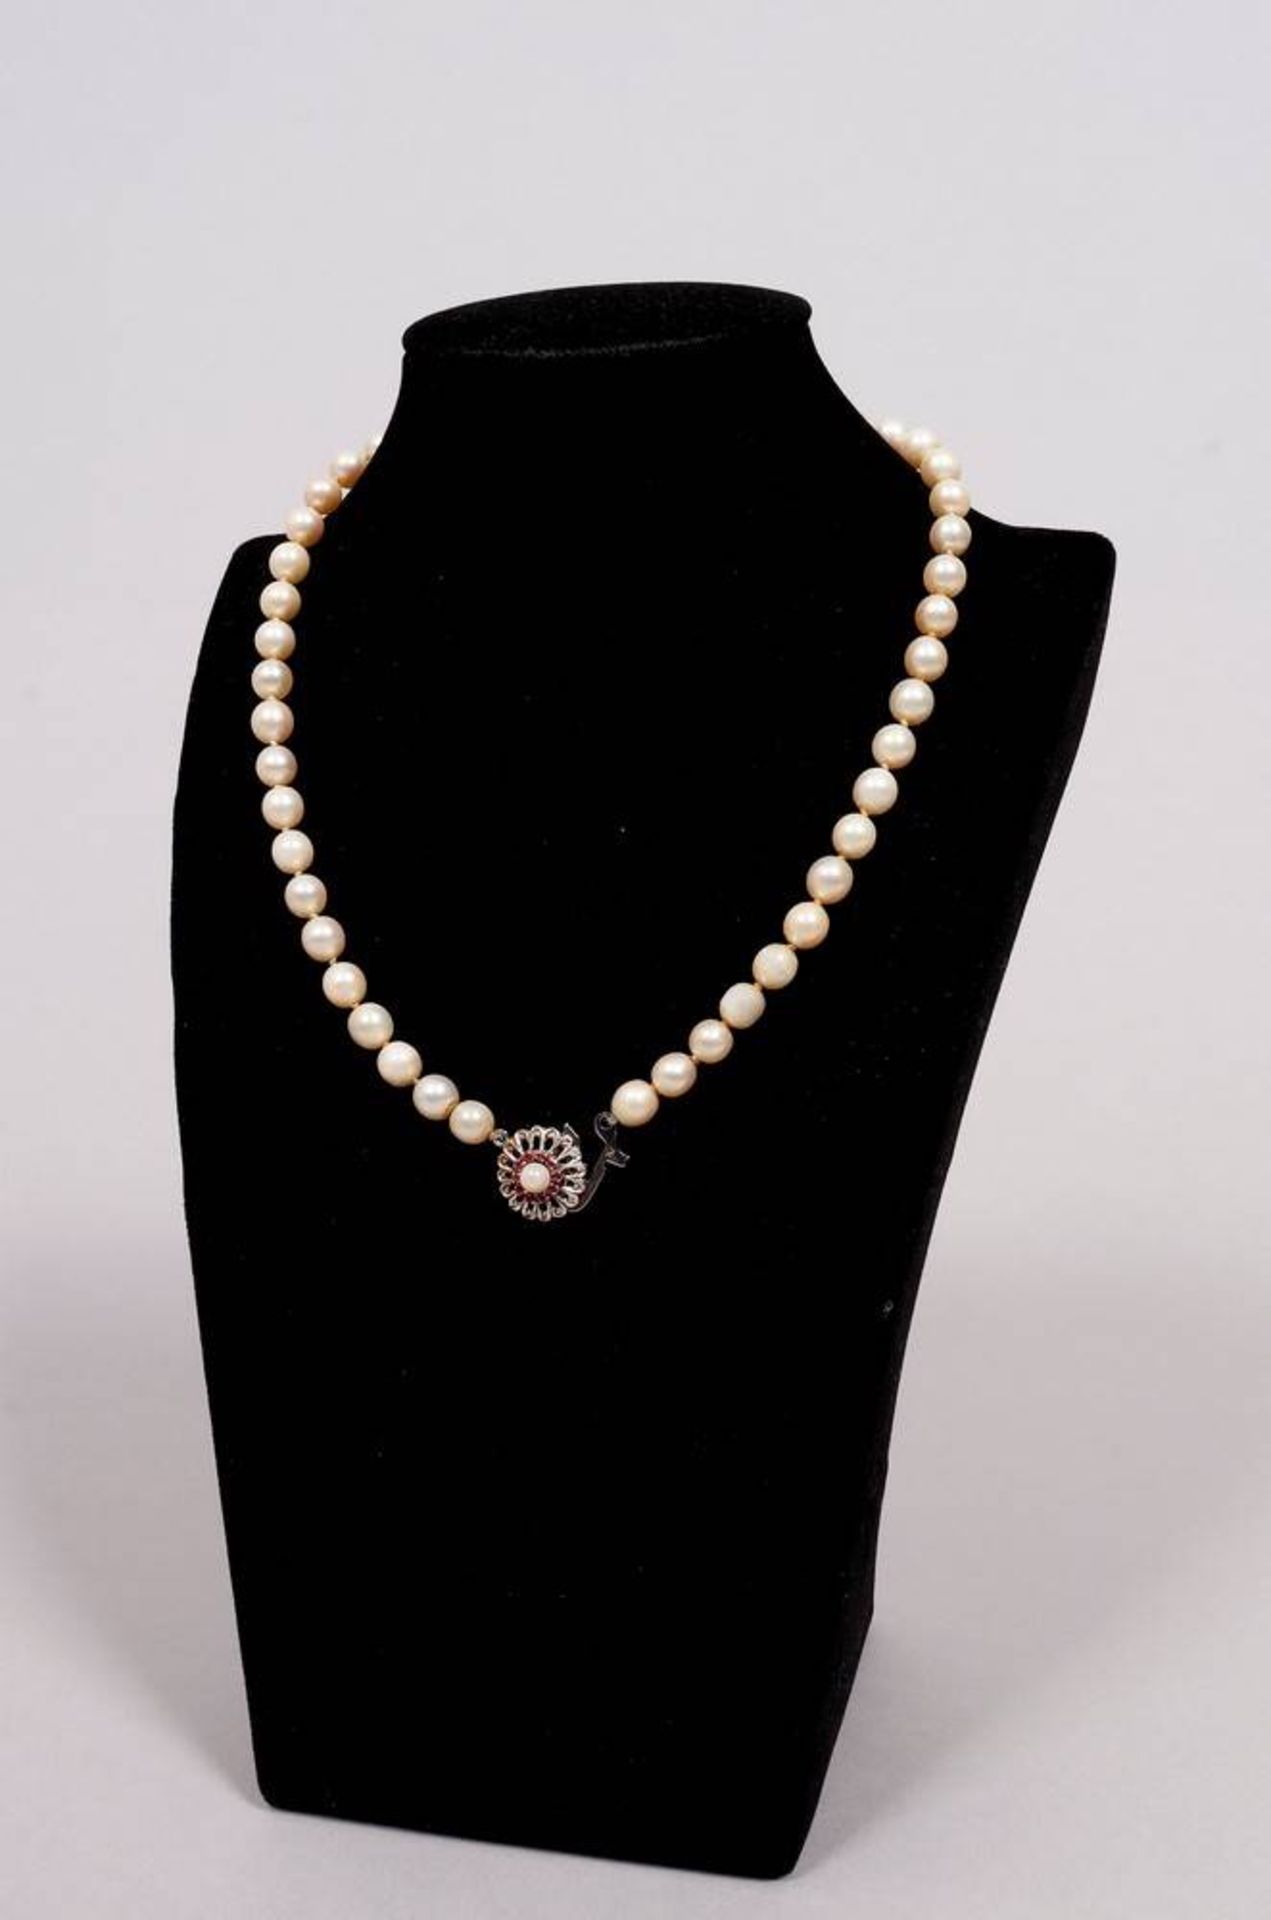 3 pearl necklaces - Image 4 of 8